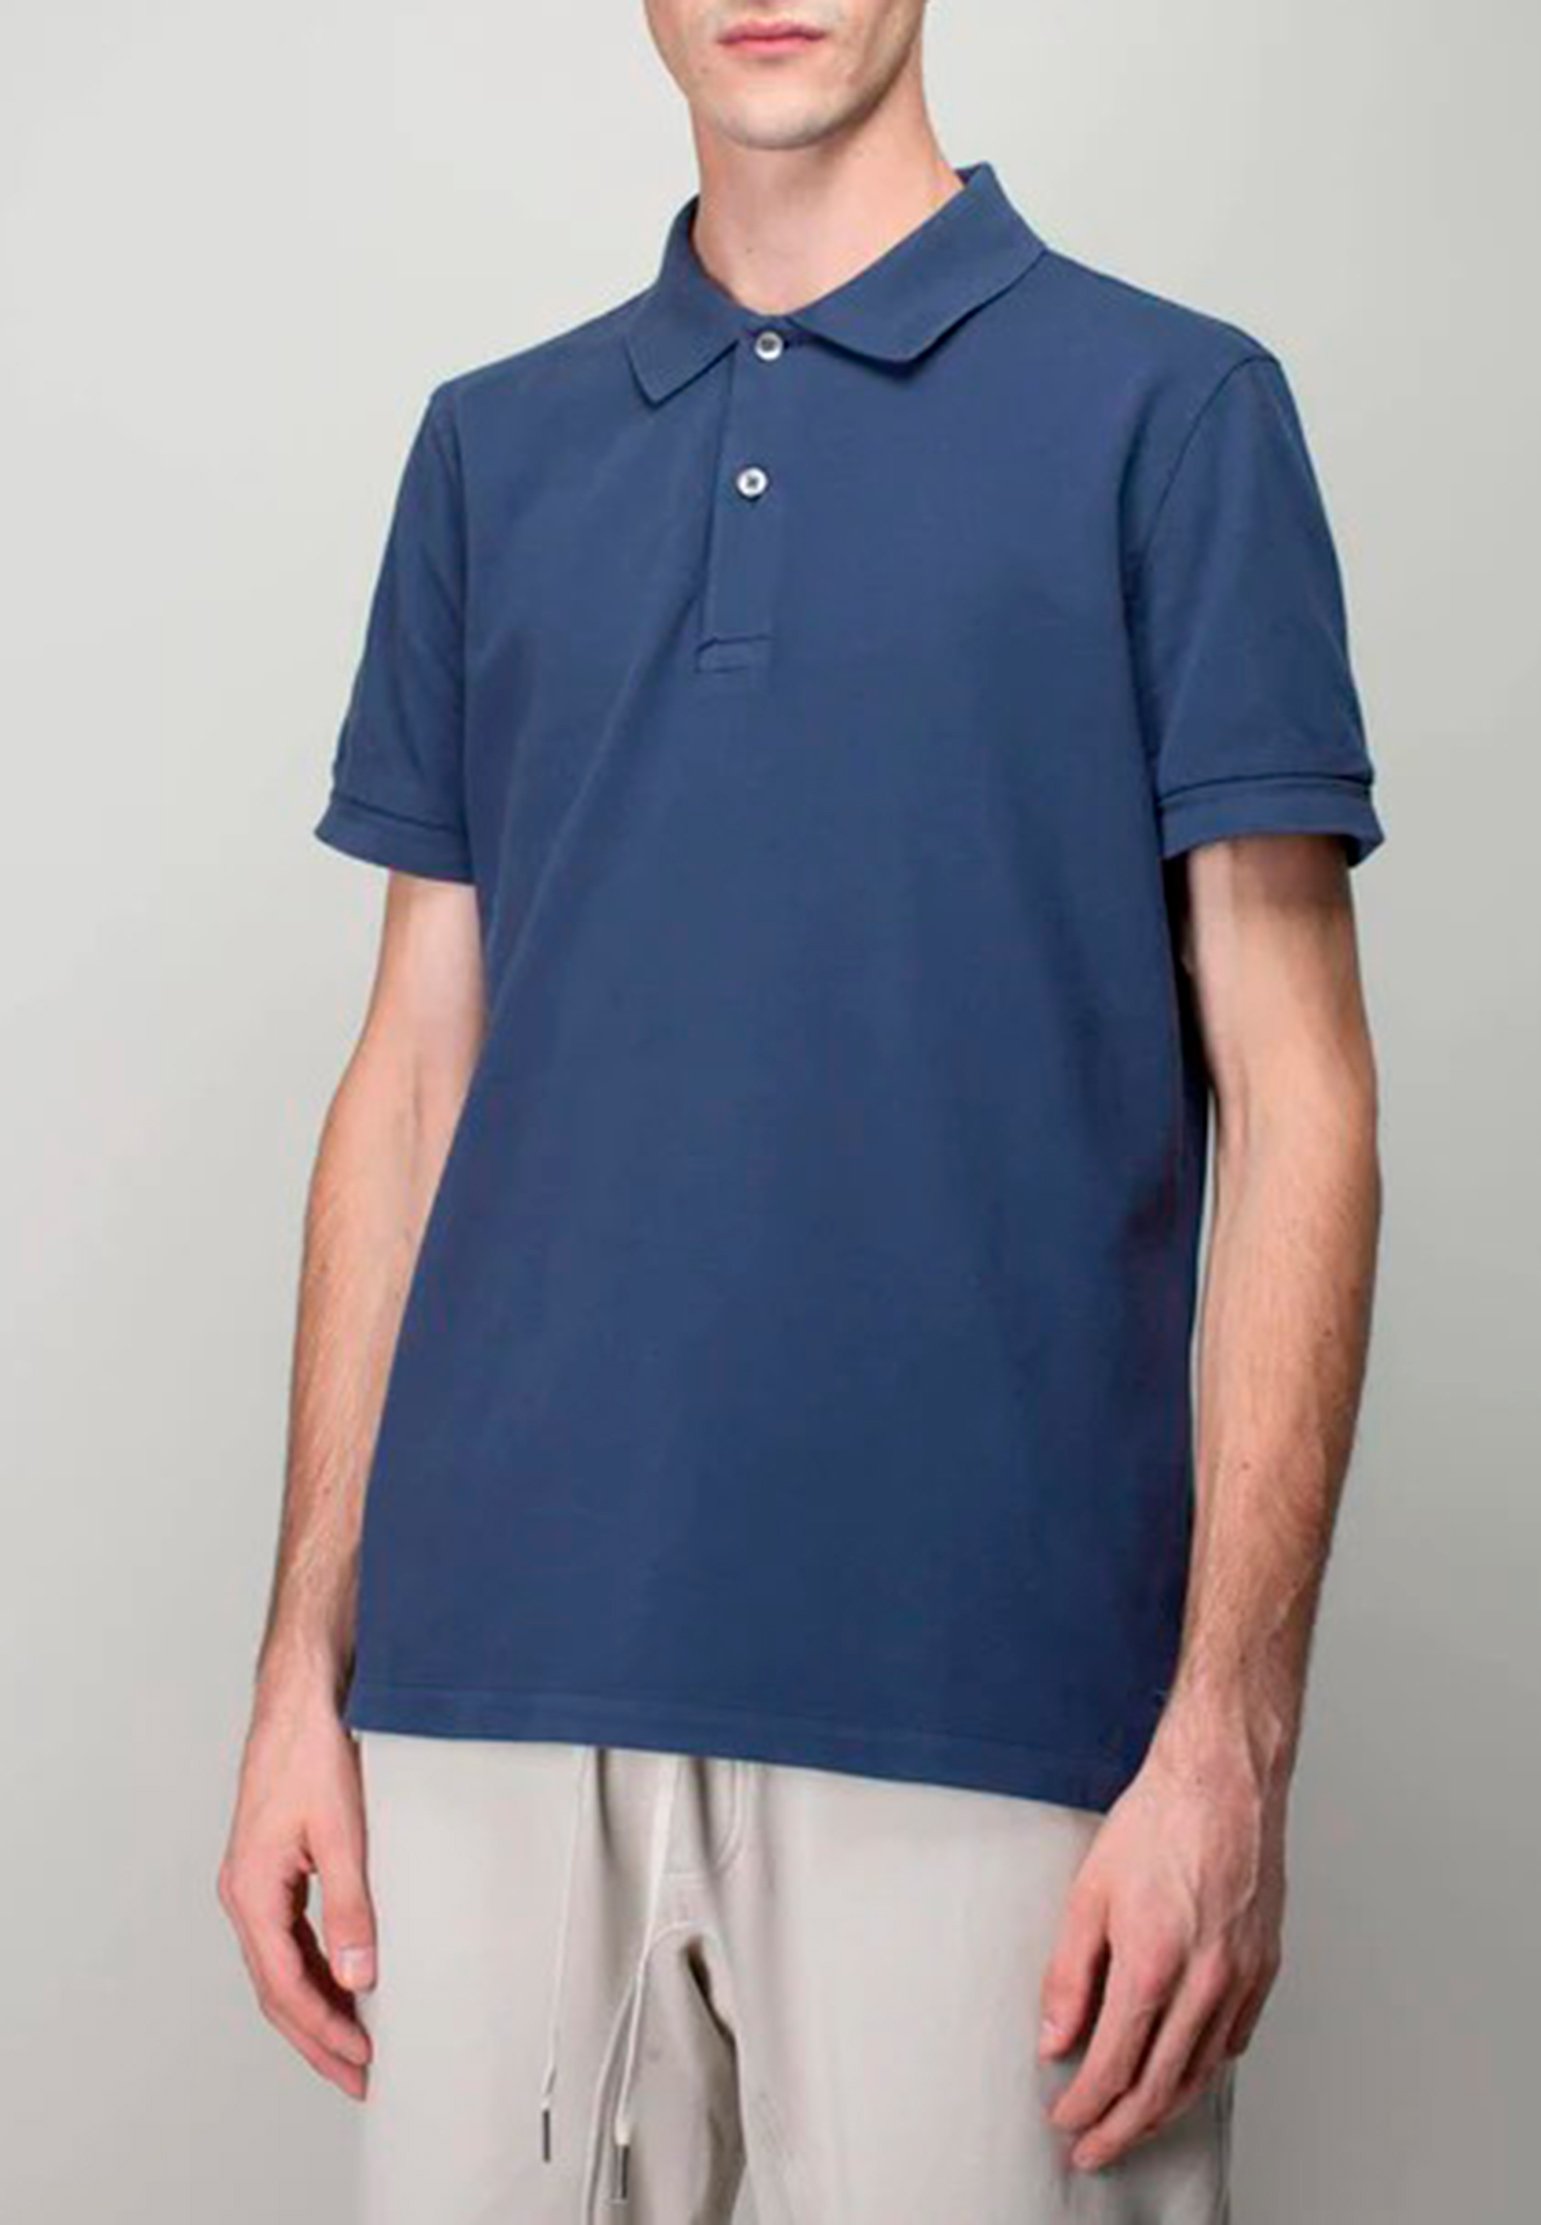 Polo TOM FORD Color: blue (Code: 1415) in online store Allure